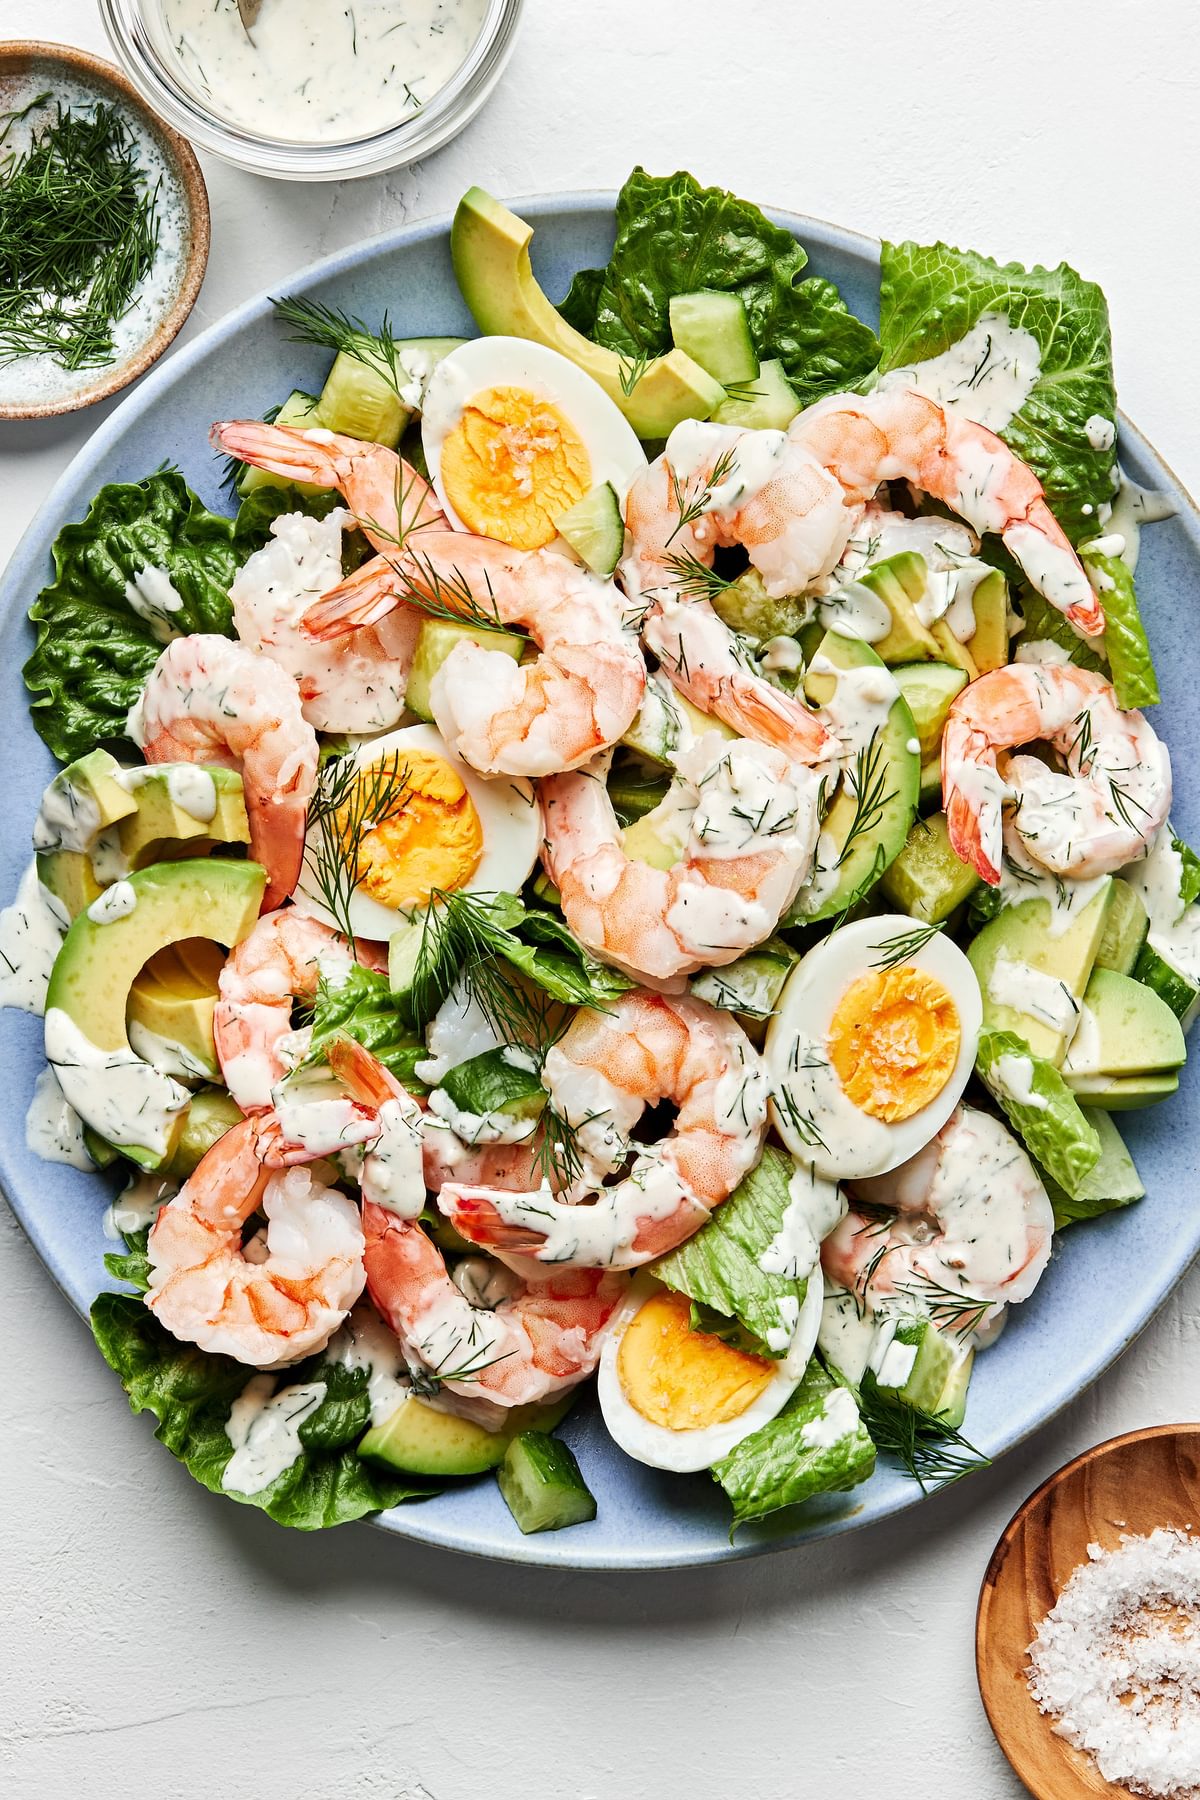 Shrimp and Avocado Salad with Dill Dressing on a platter